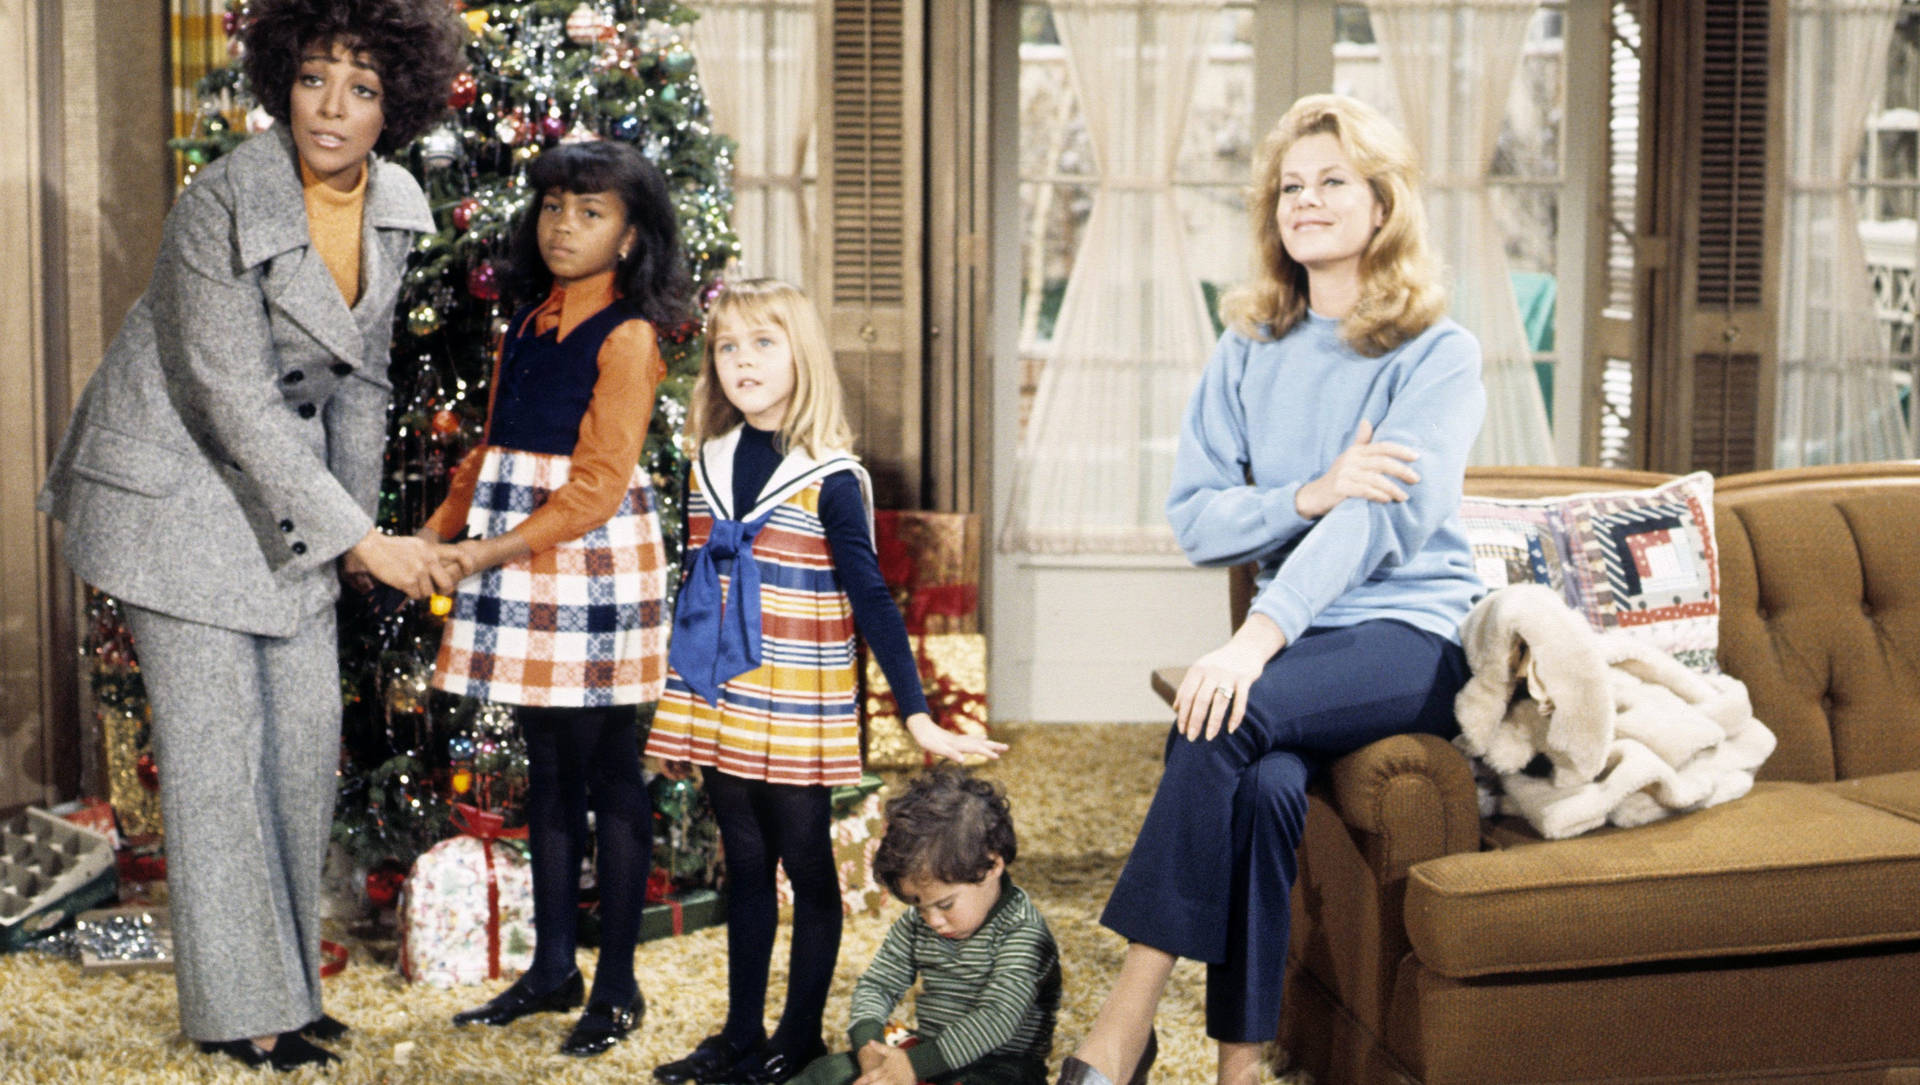 Bewitched Casts During Christmas Wallpaper